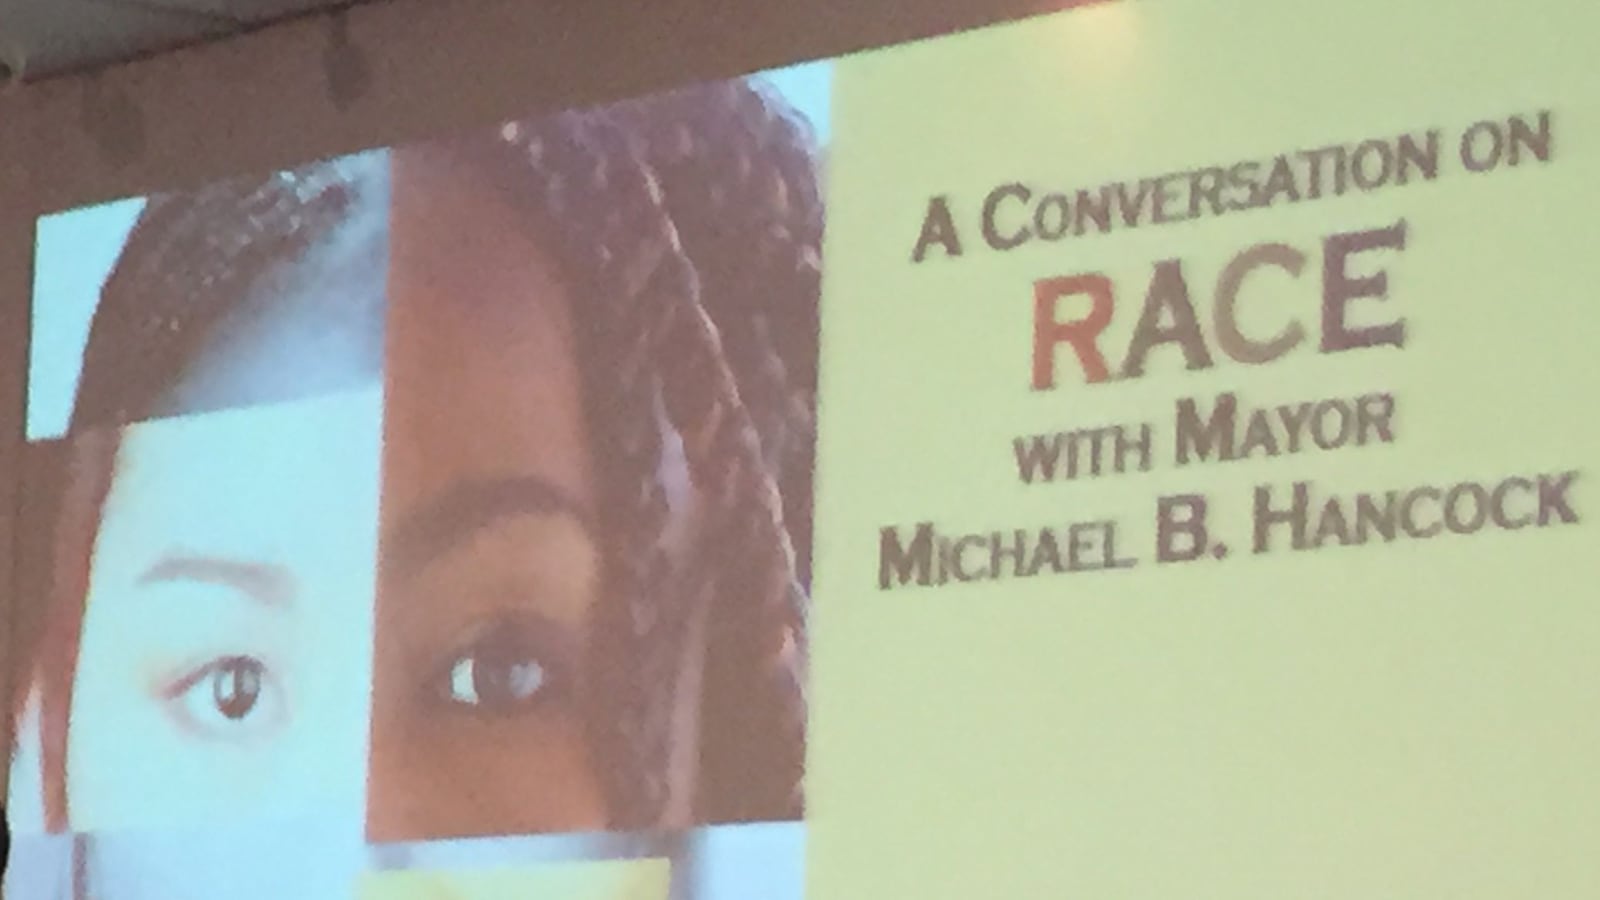 Denver Mayor Michael Hancock's conversation on race included two Denver students as panelists.